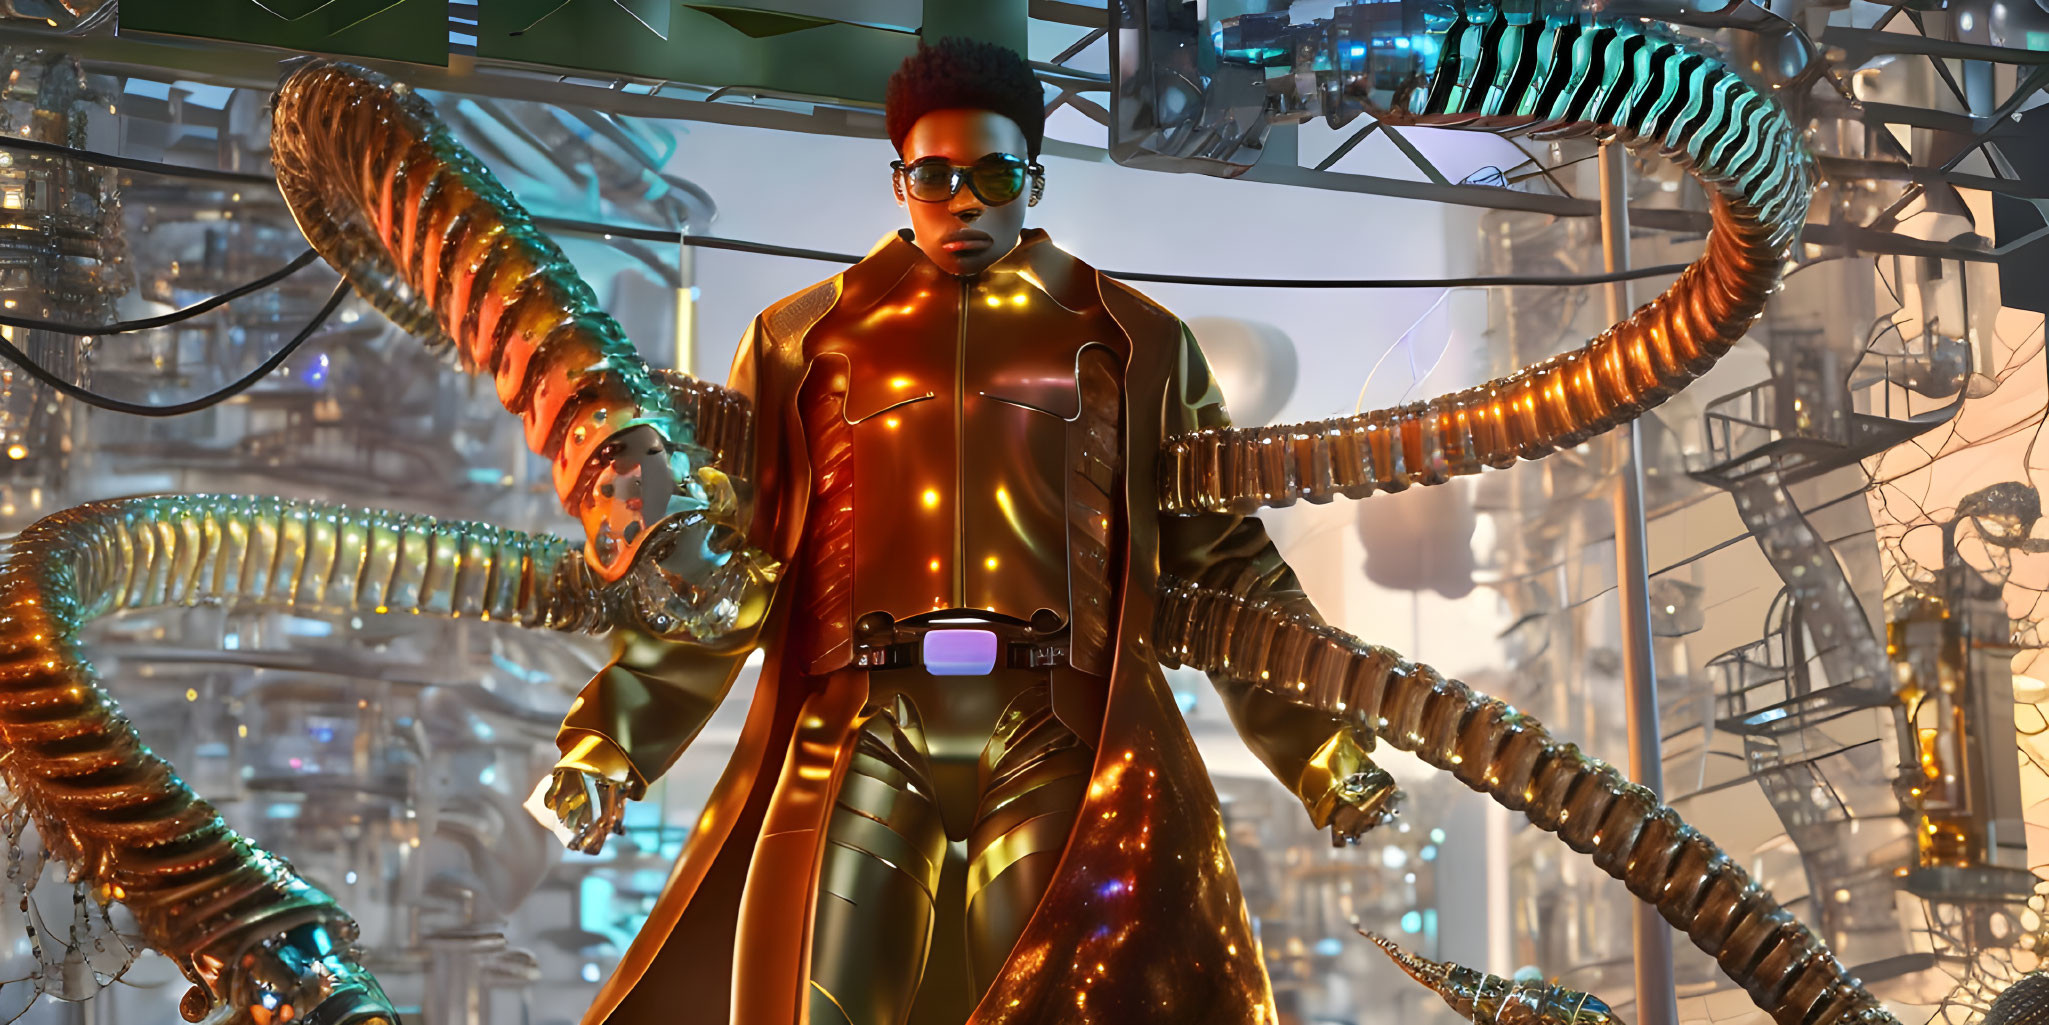 Futuristic individual in golden suit with glowing lines and mechanical tentacles in industrial setting